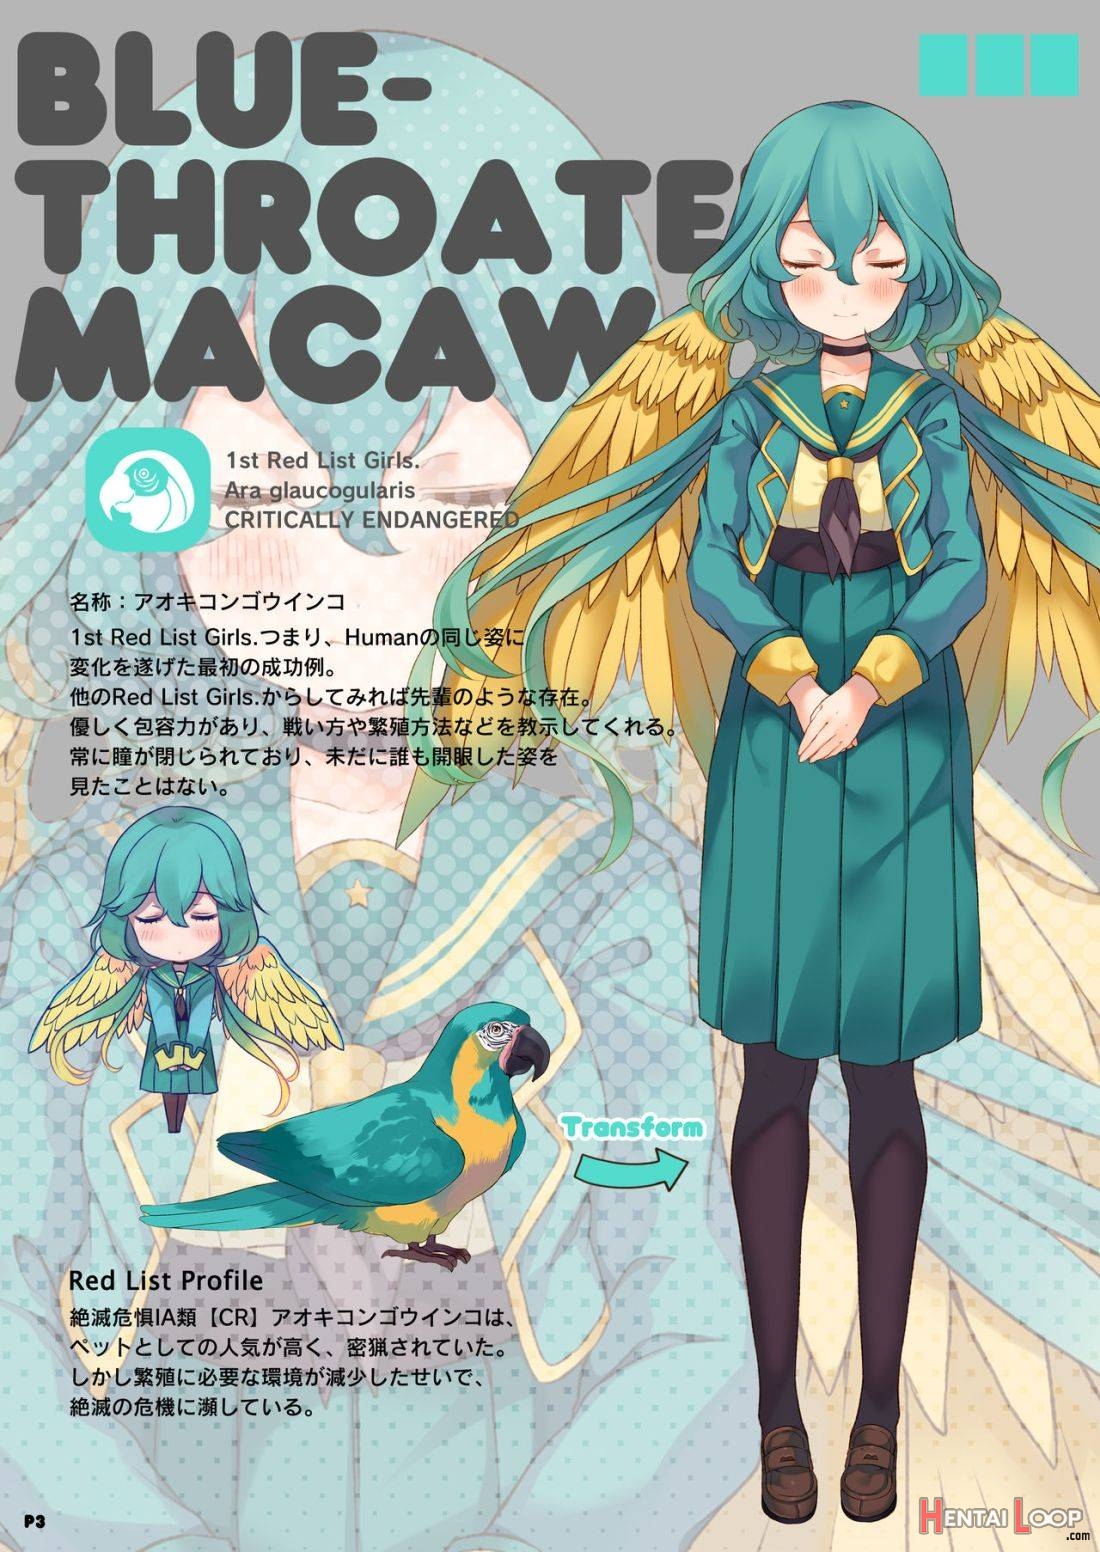 MACAW;EDUCATION page 2